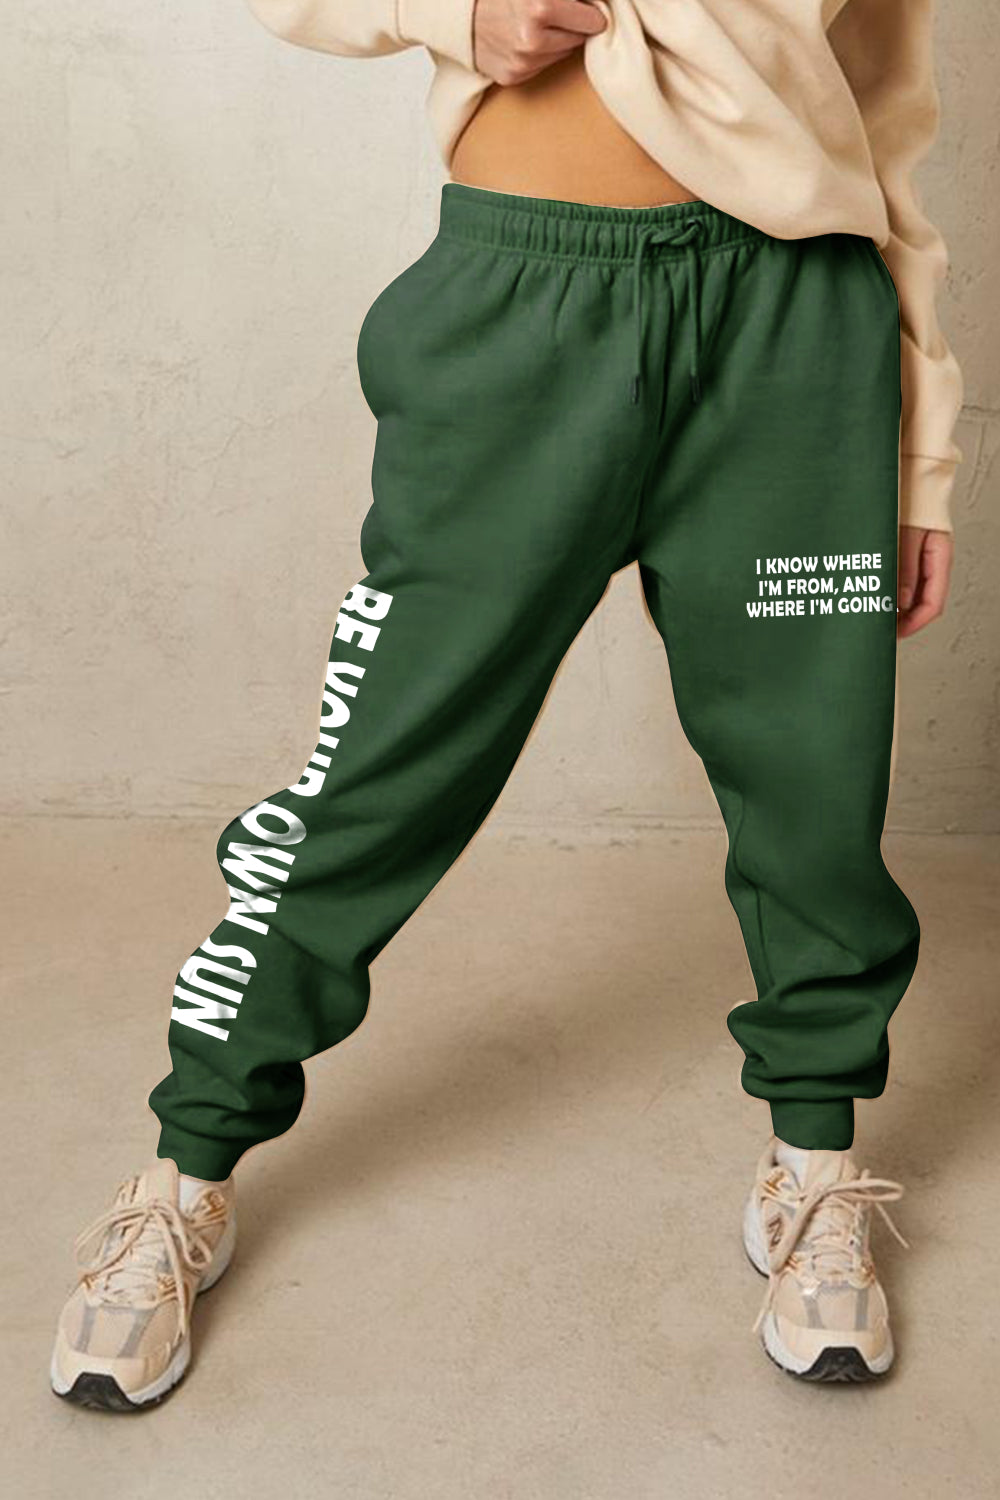 Simply Love Full Size BE YOUR OWN SUN Graphic Sweatpants Trendsi